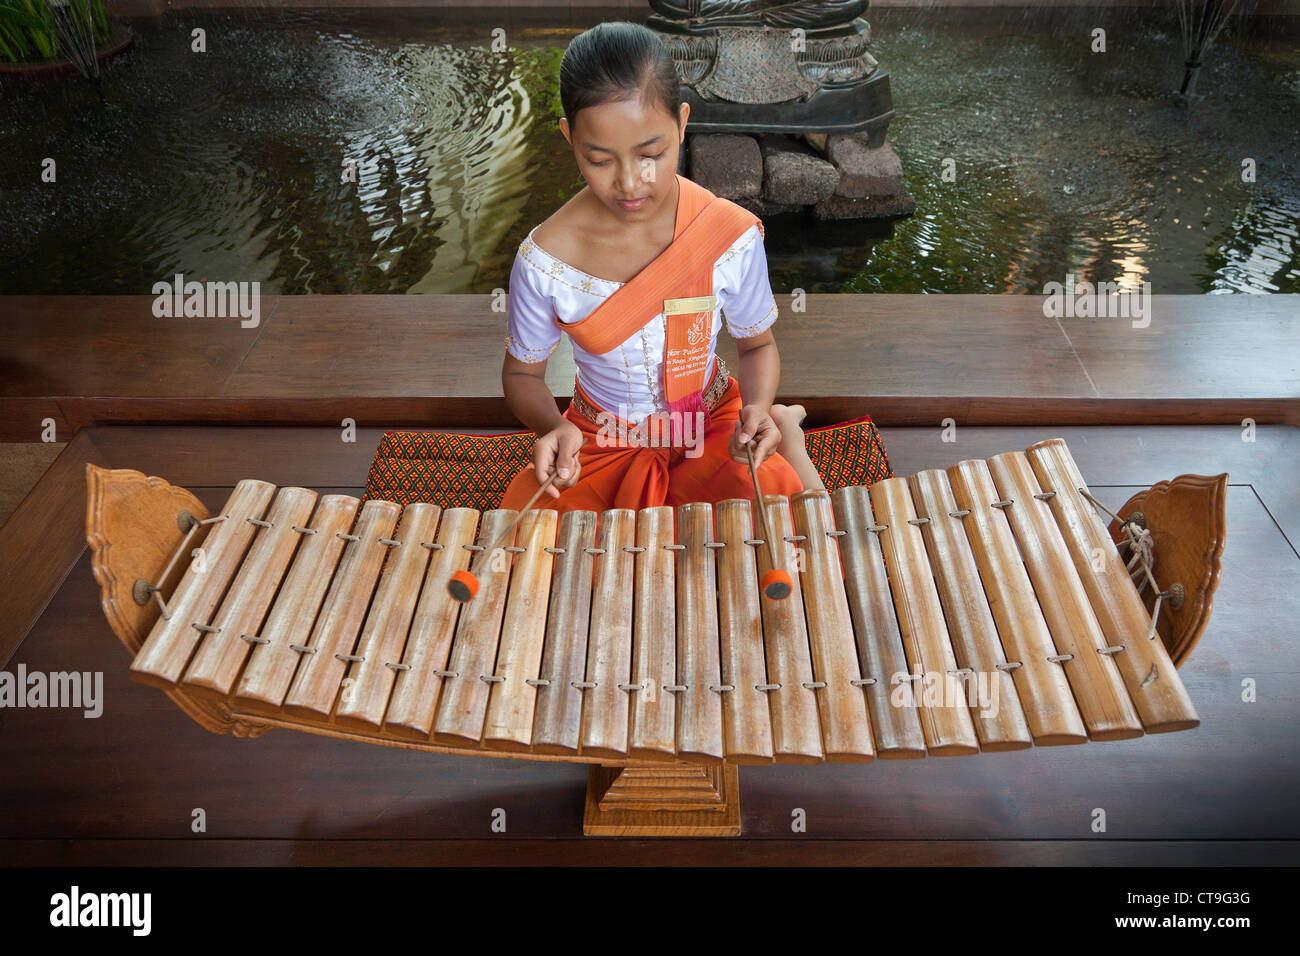 Roneat-ek is a xylophone used in Khmer classical music. Being played by young Cambodian woman. Stock Photo